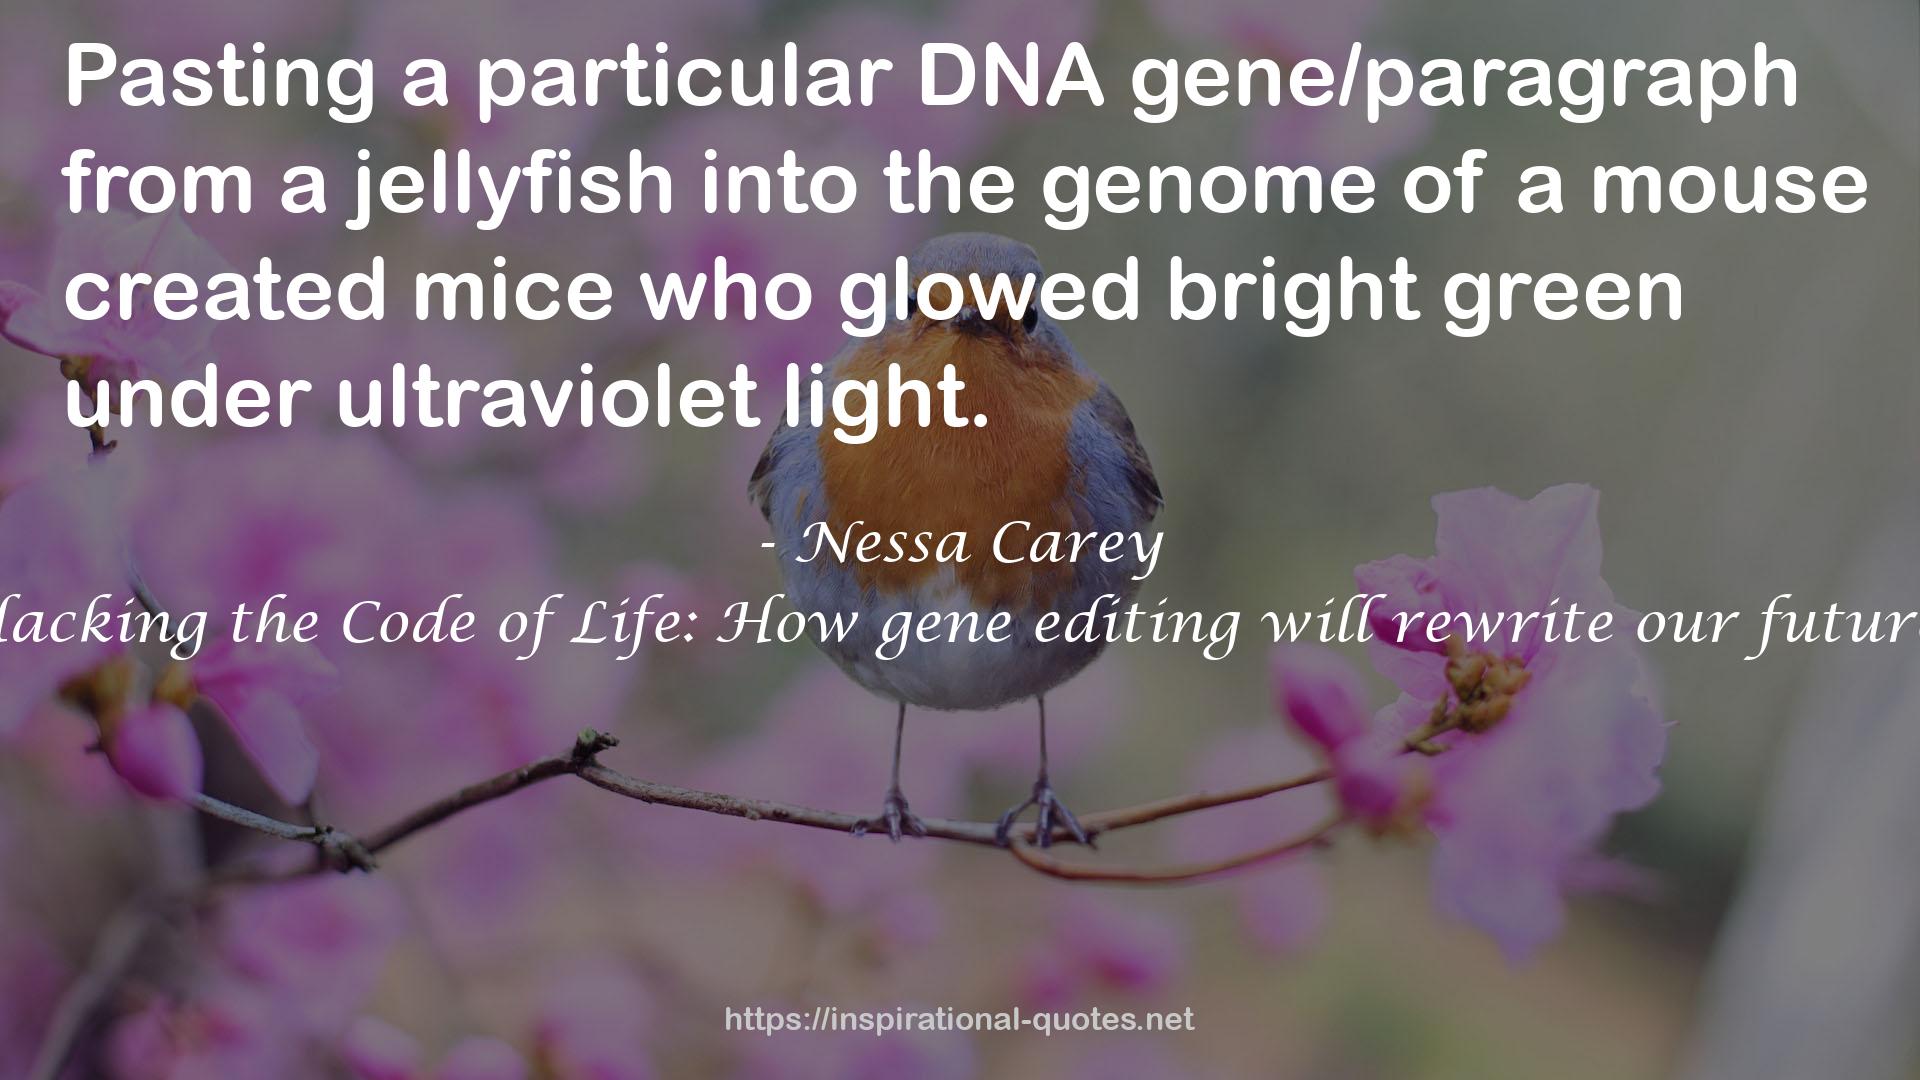 Hacking the Code of Life: How gene editing will rewrite our futures QUOTES